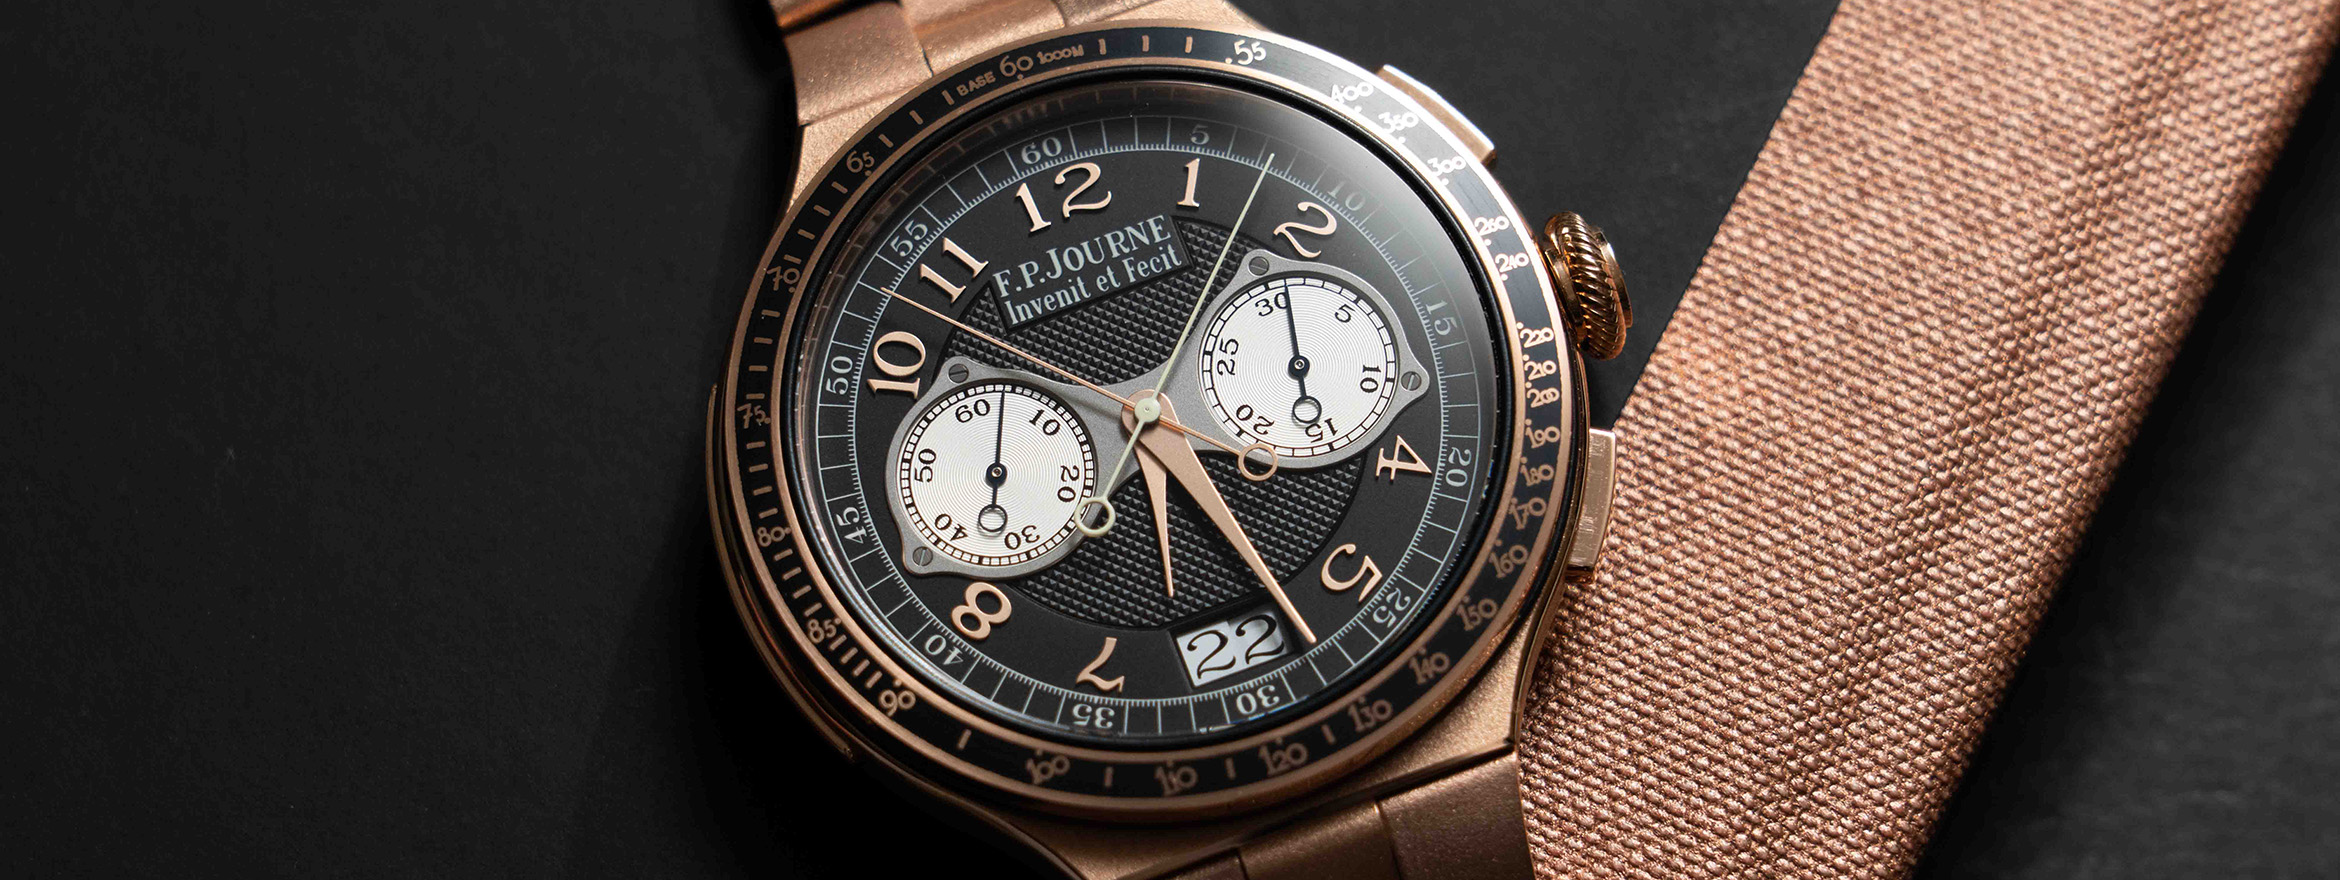 A Look At F.P.Journe lineSport Chronographe Rattrapante